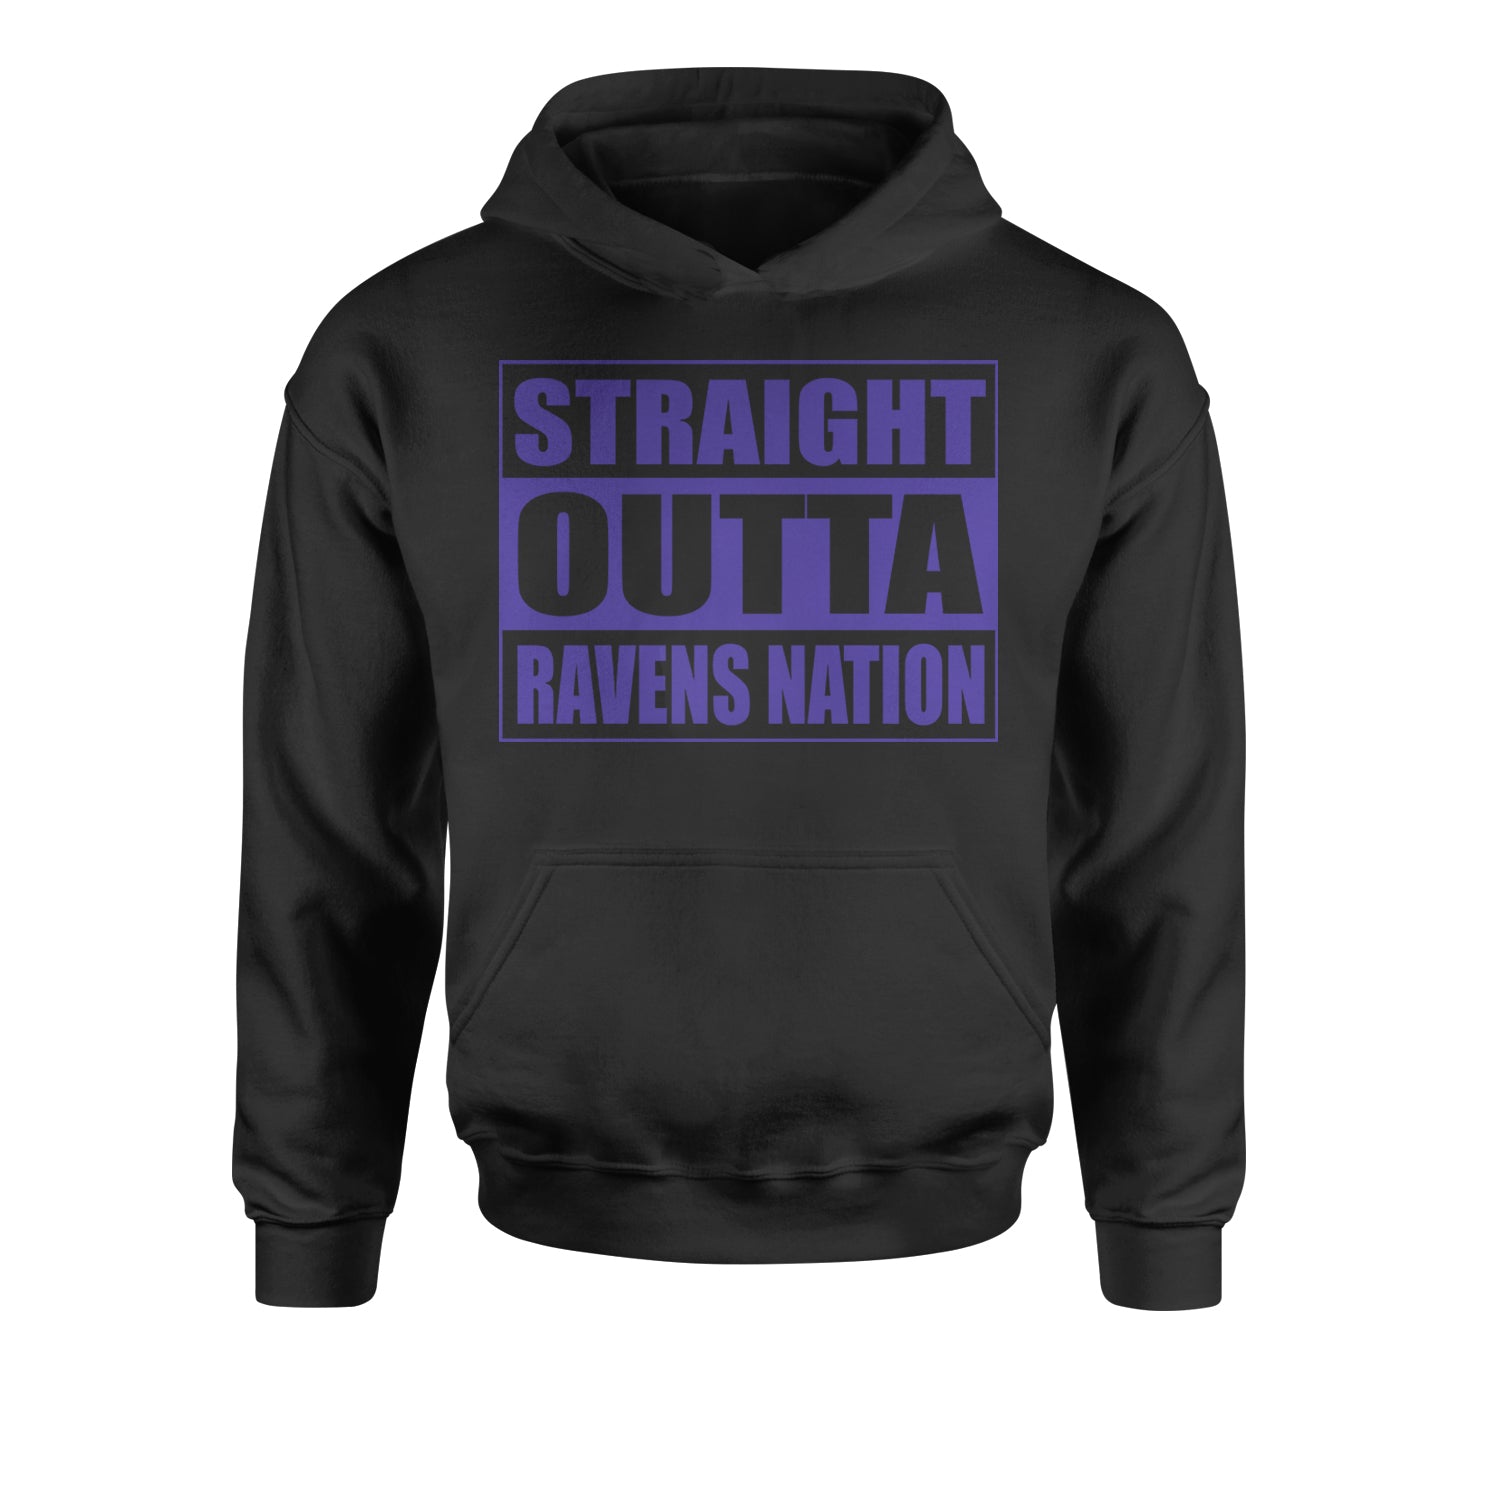 Straight Outta Ravens Nation Youth-Sized Hoodie